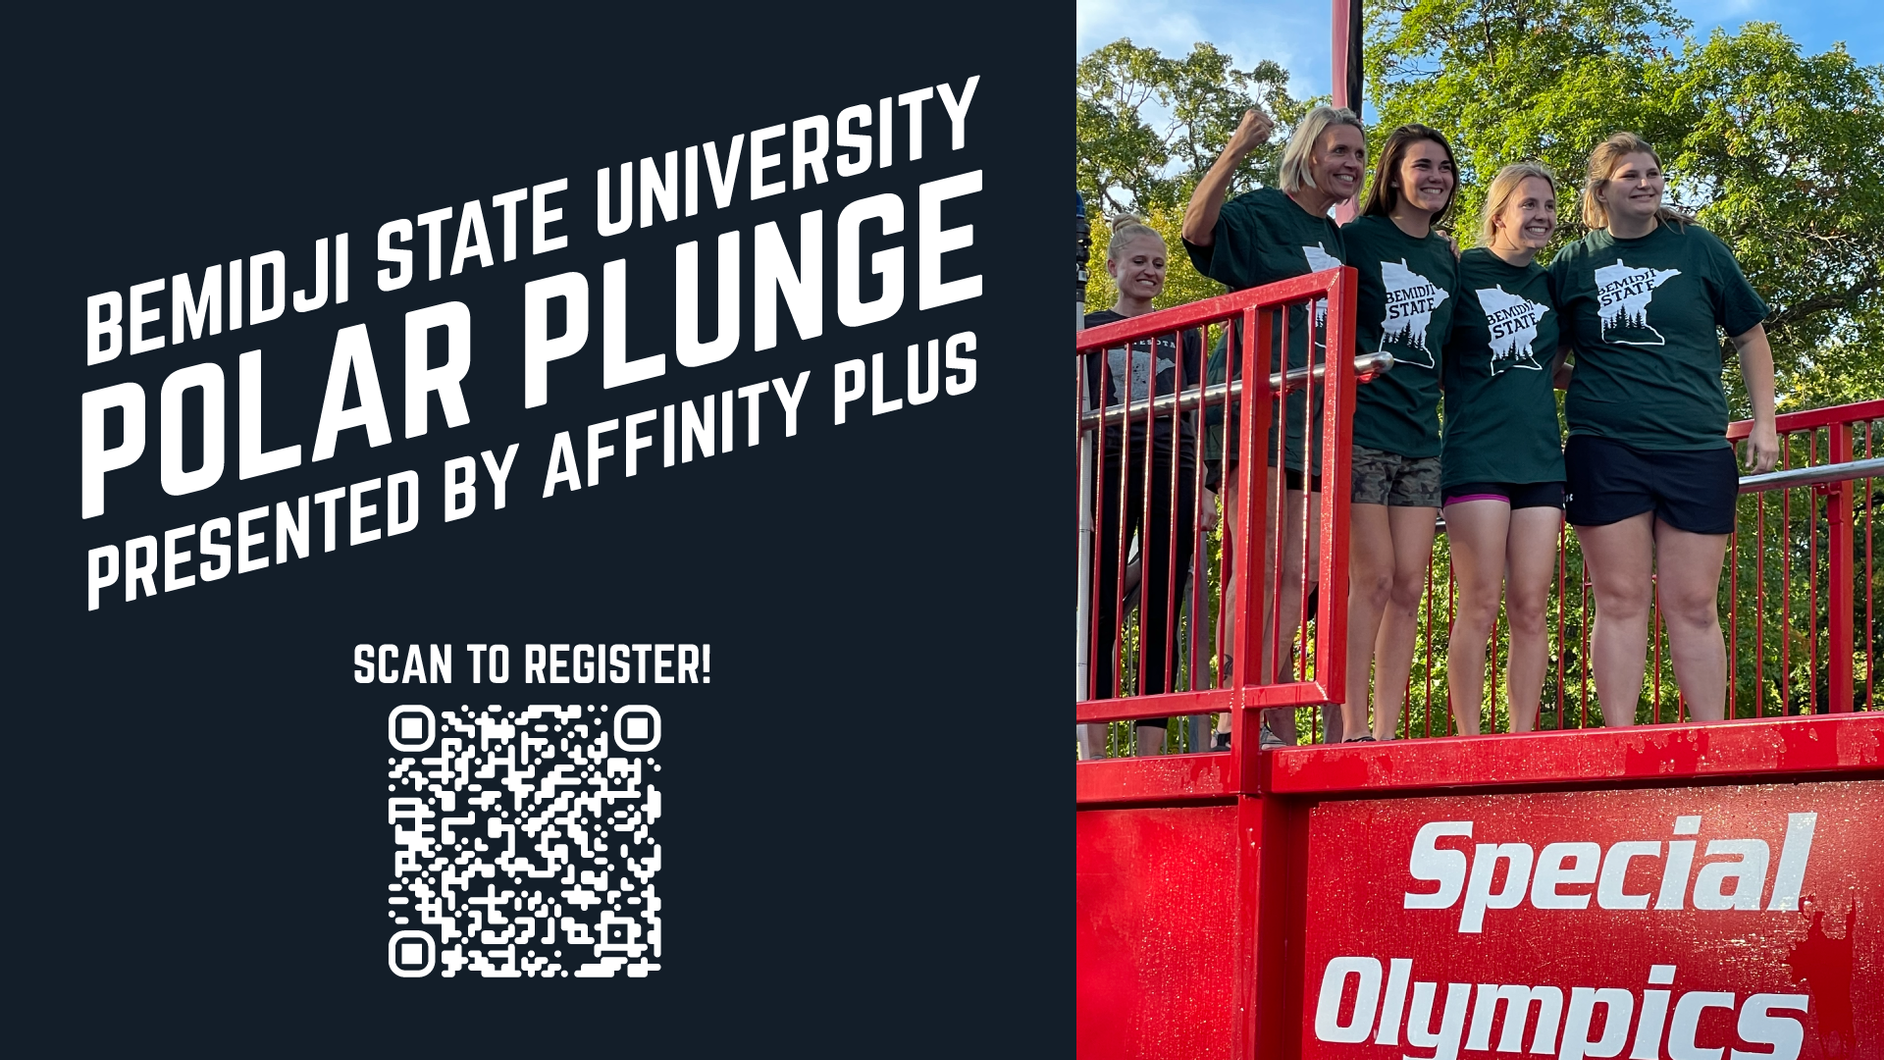 BSU and Affinity Plus will host a Polar Plunge April 16